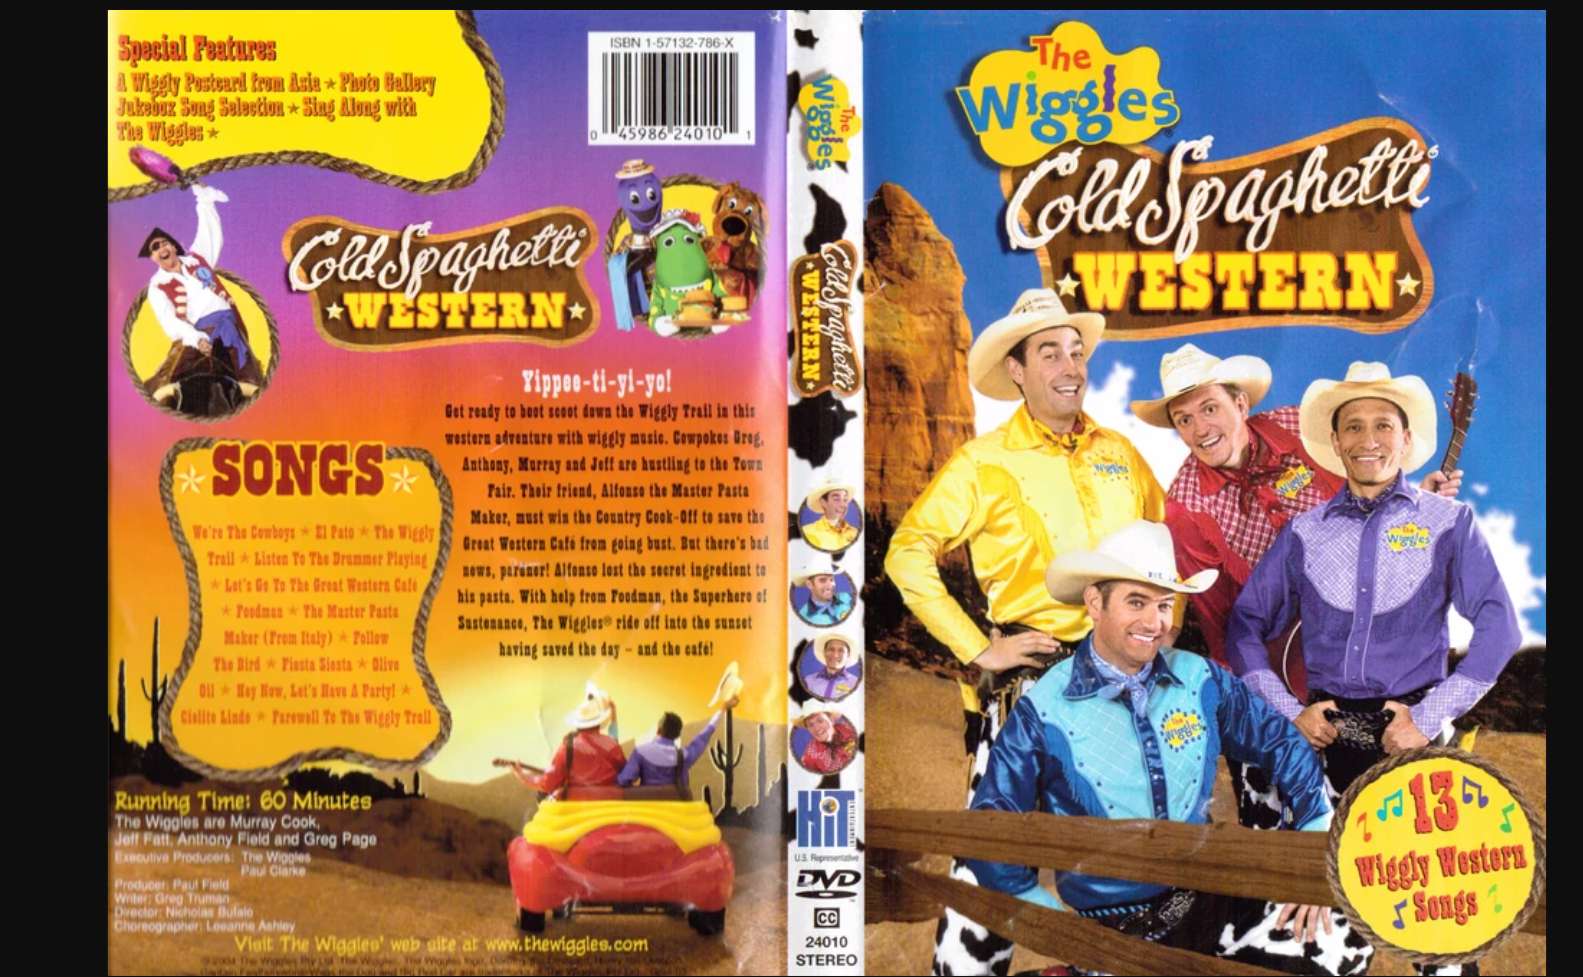 Best Buy: The Wiggles: Cold Spaghetti Western [DVD] [2003]